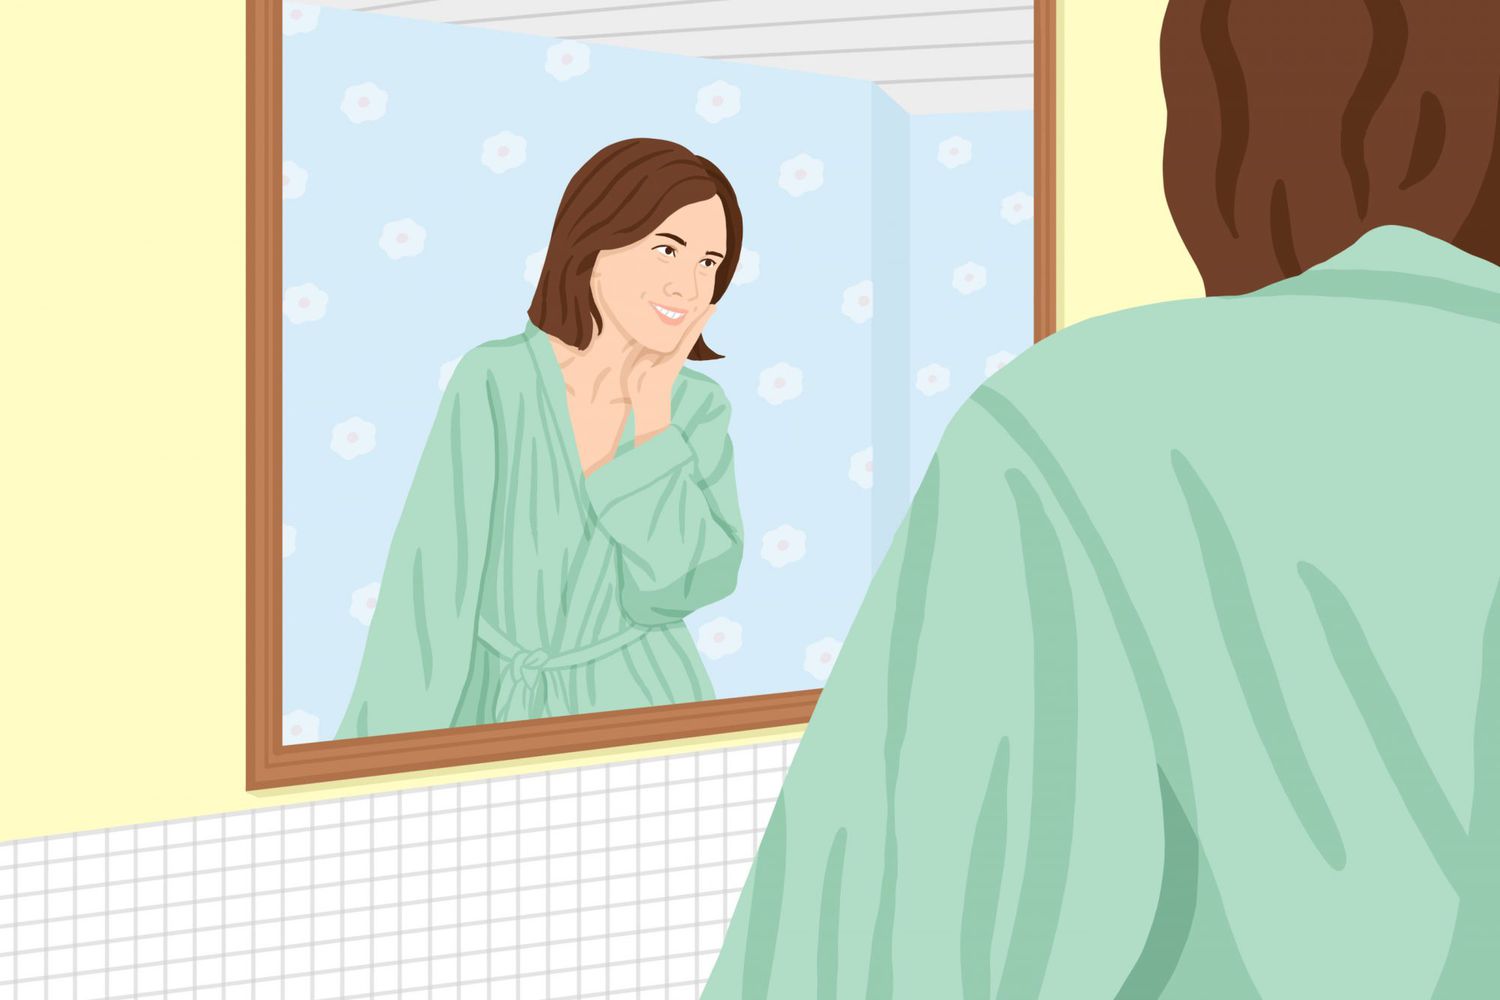 An illustration of a woman looking at herself in the mirror.